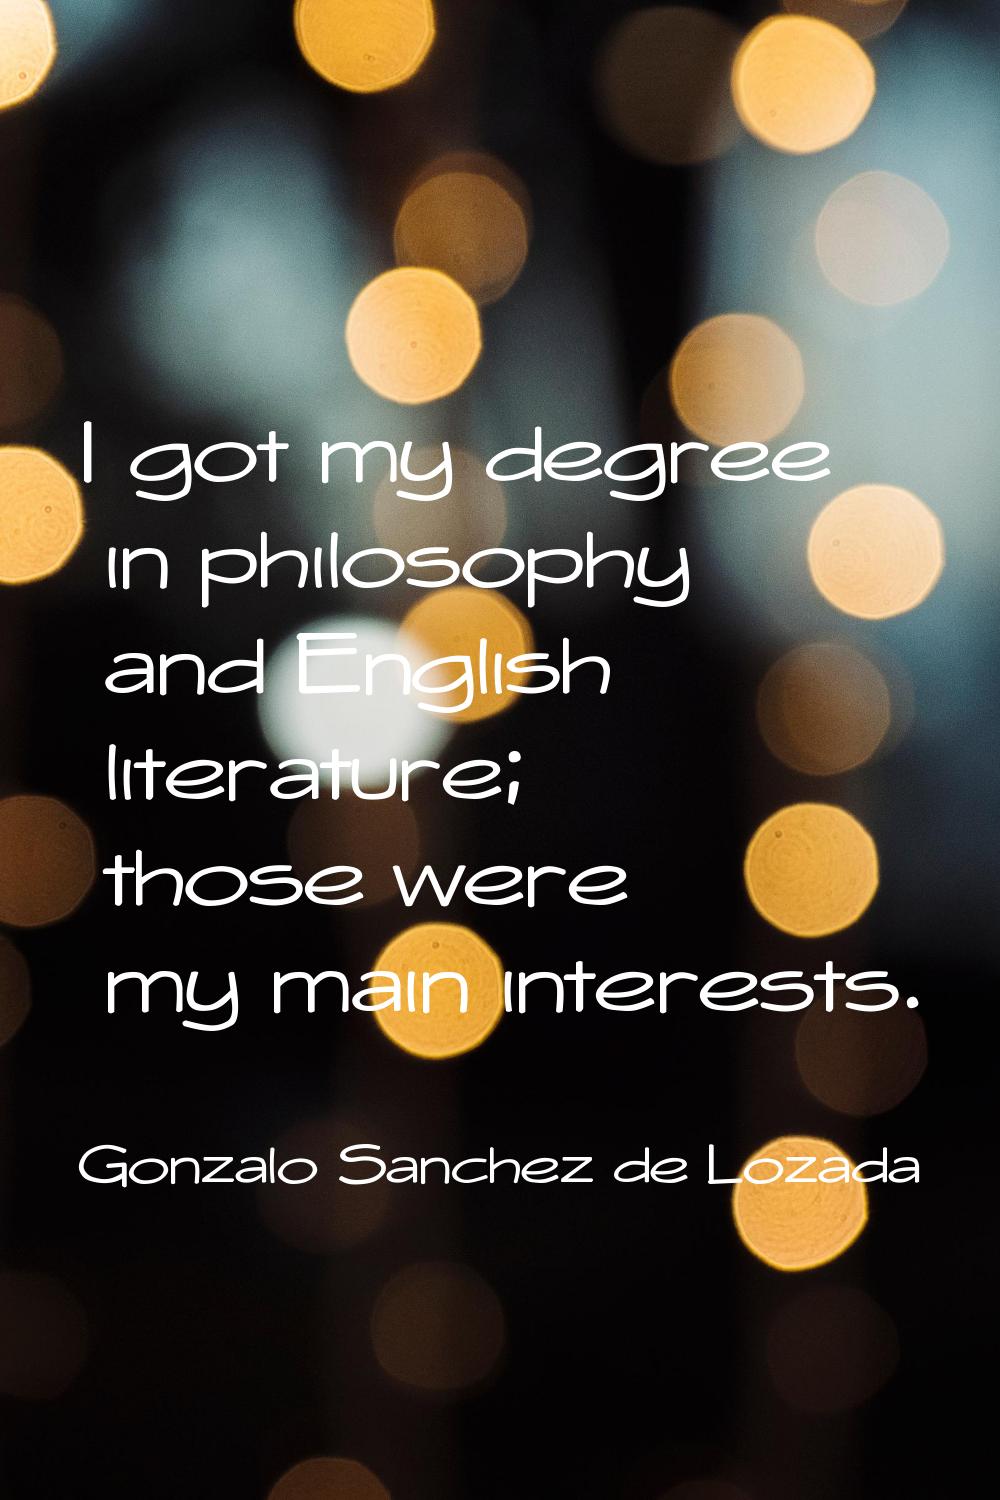 I got my degree in philosophy and English literature; those were my main interests.